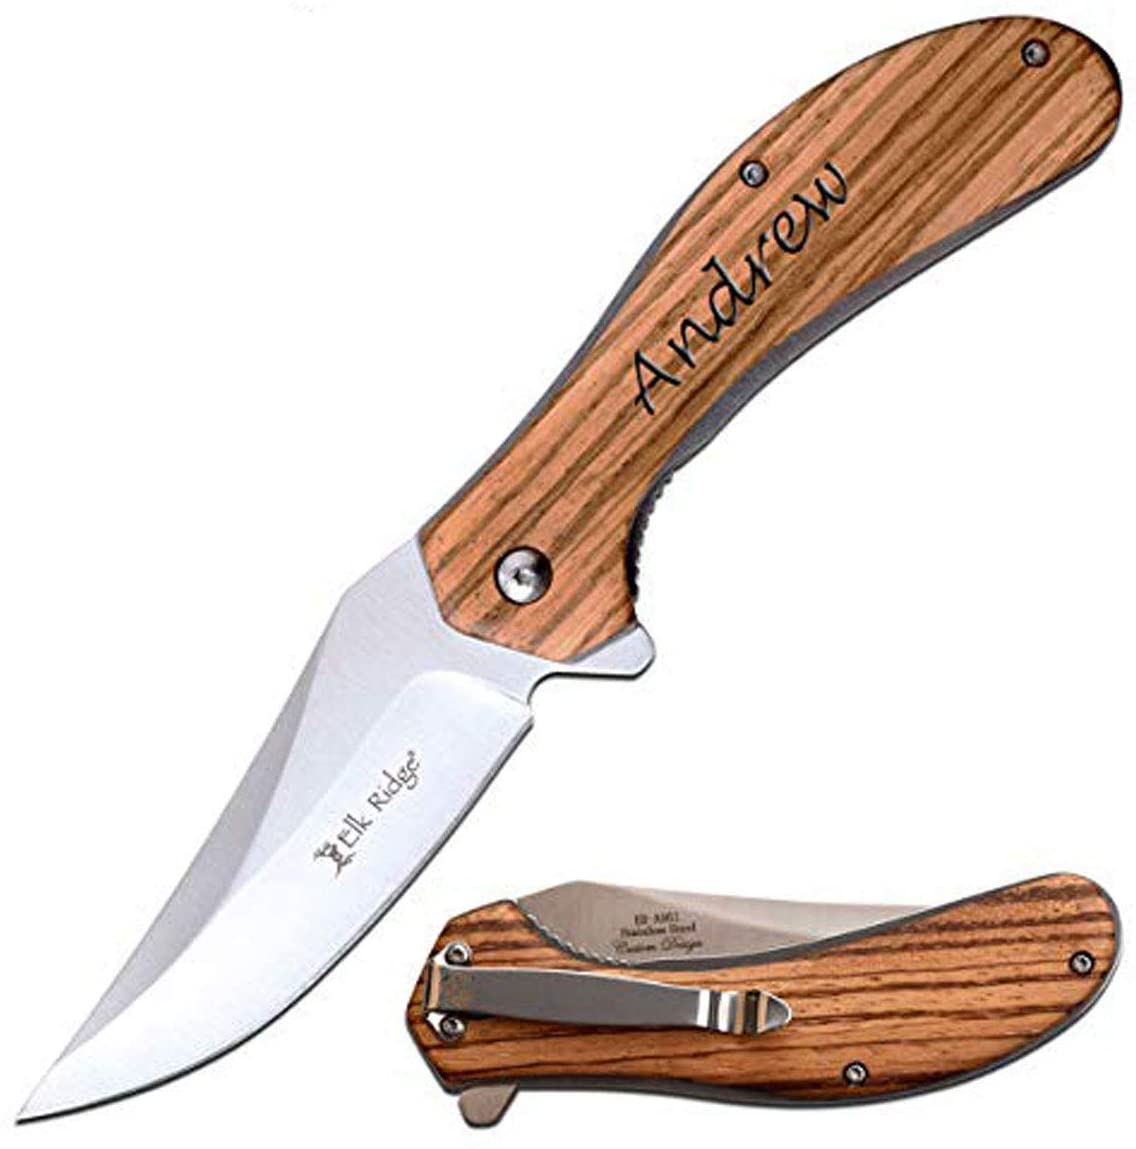 GIFTS INFINITY Personalized Engraved 8.25" Folding Pocket Knife for Men, Custom Pocket Knife with Wood Handle